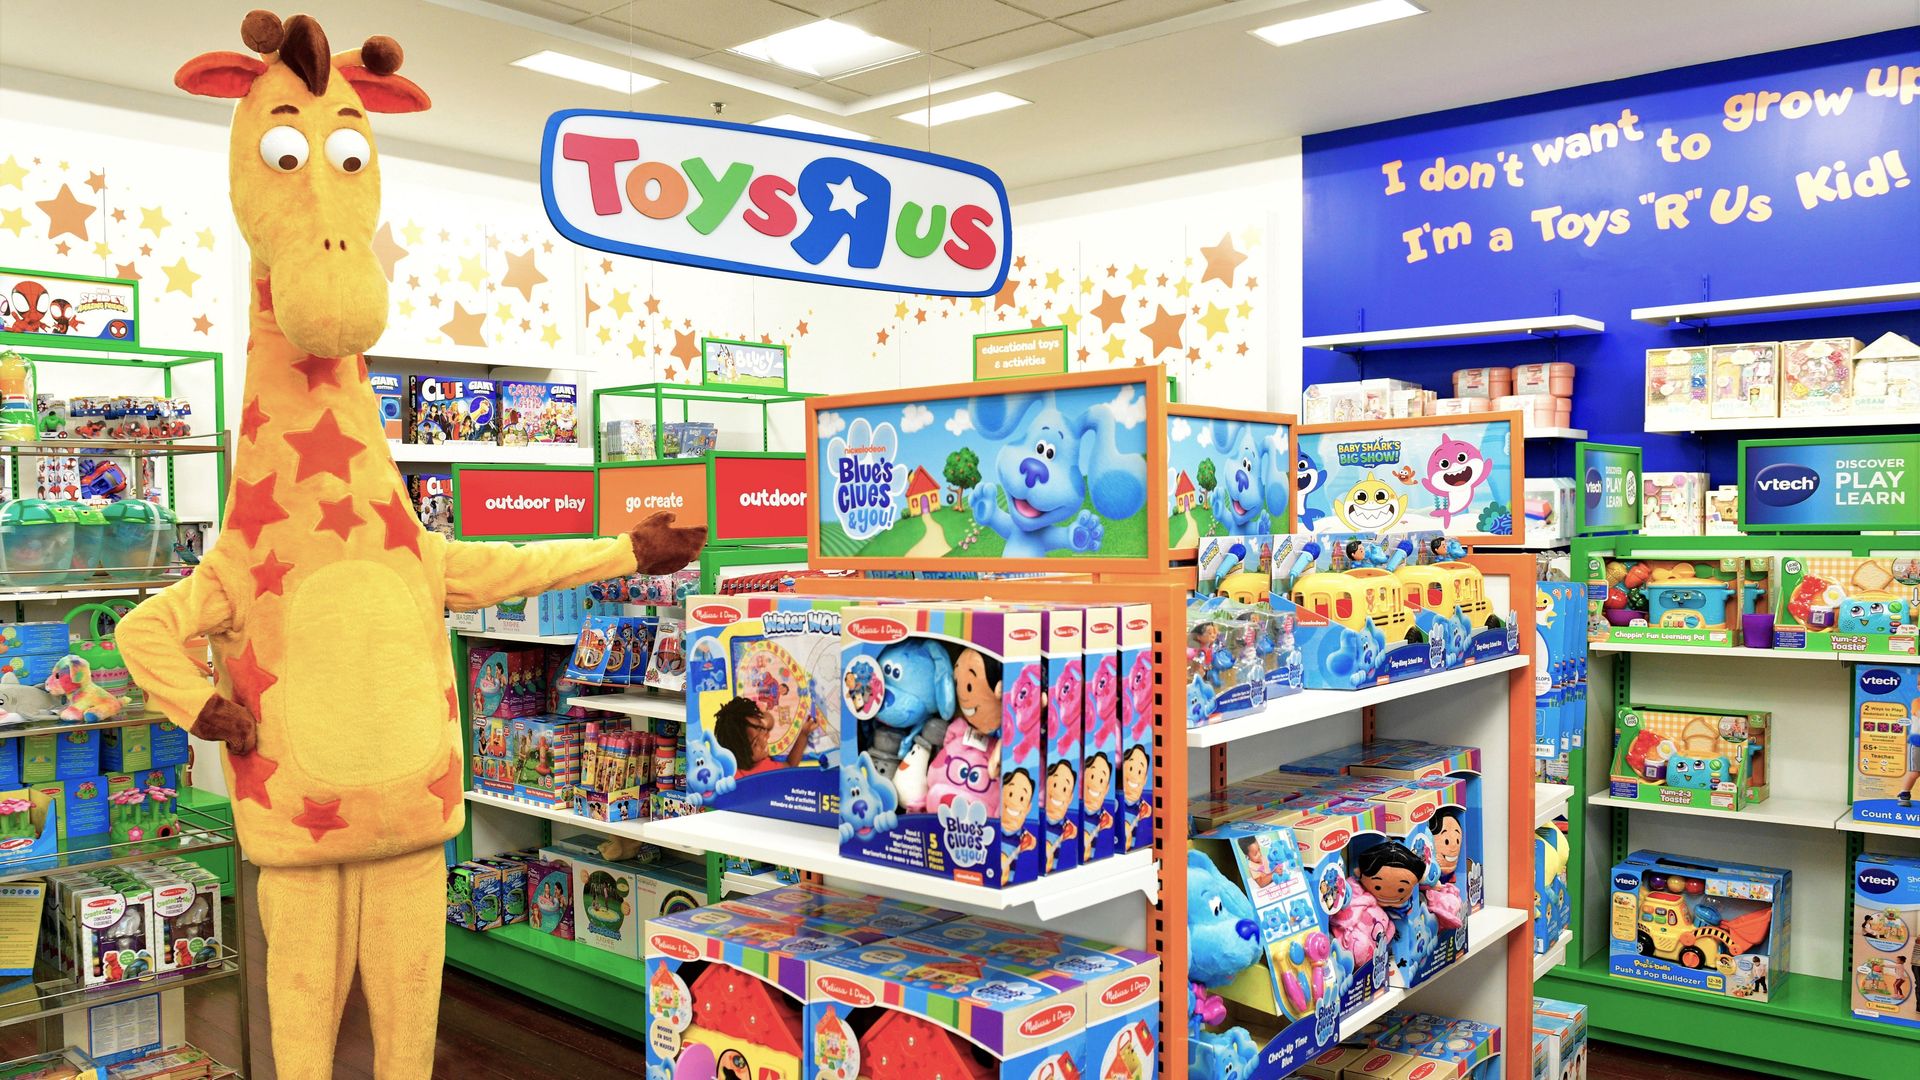 Toys R Us shop in Macy's store with Geoffrey the Giraffe